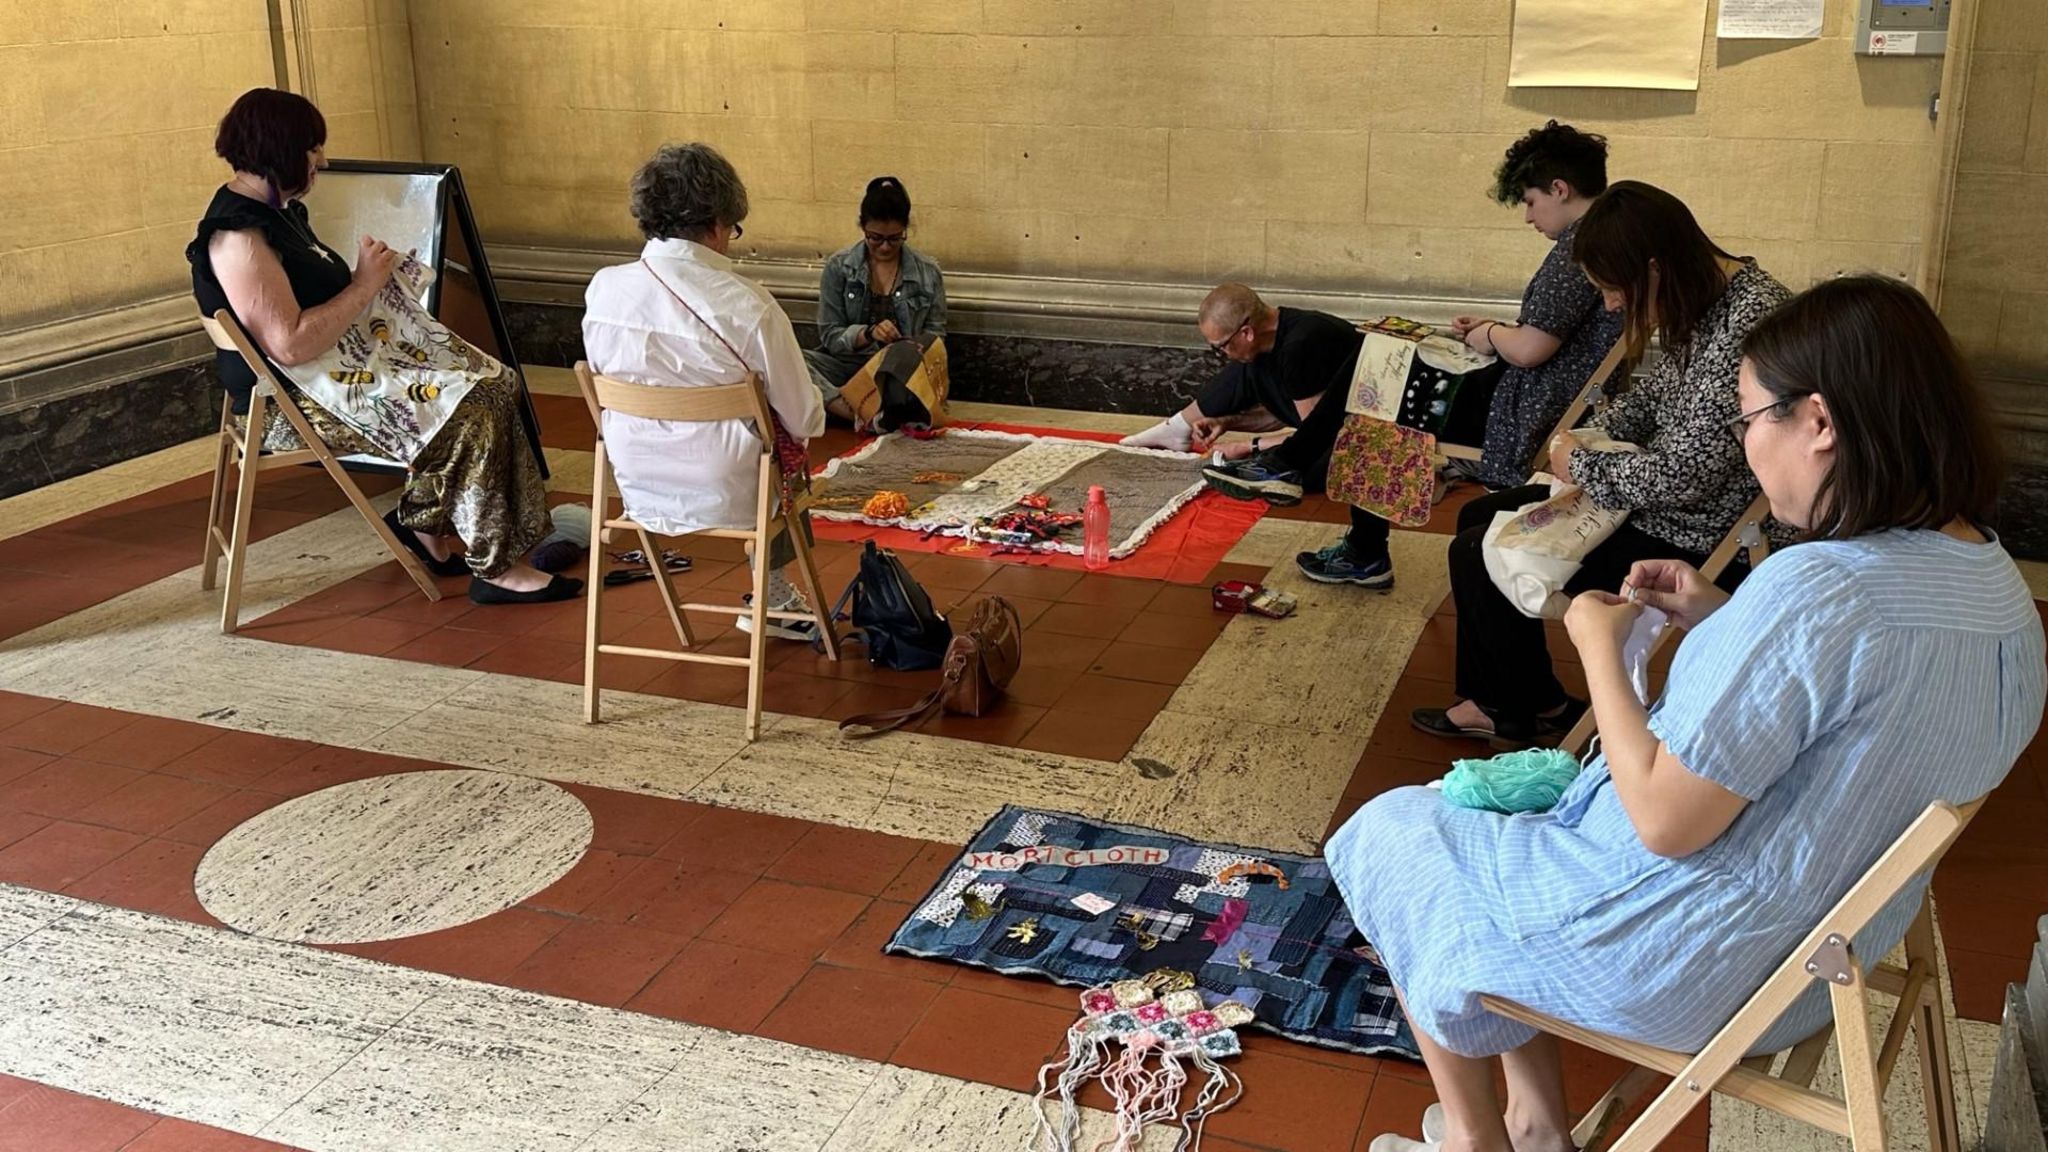 Seven women sitting on chairs and the floor working on patchwork pieces